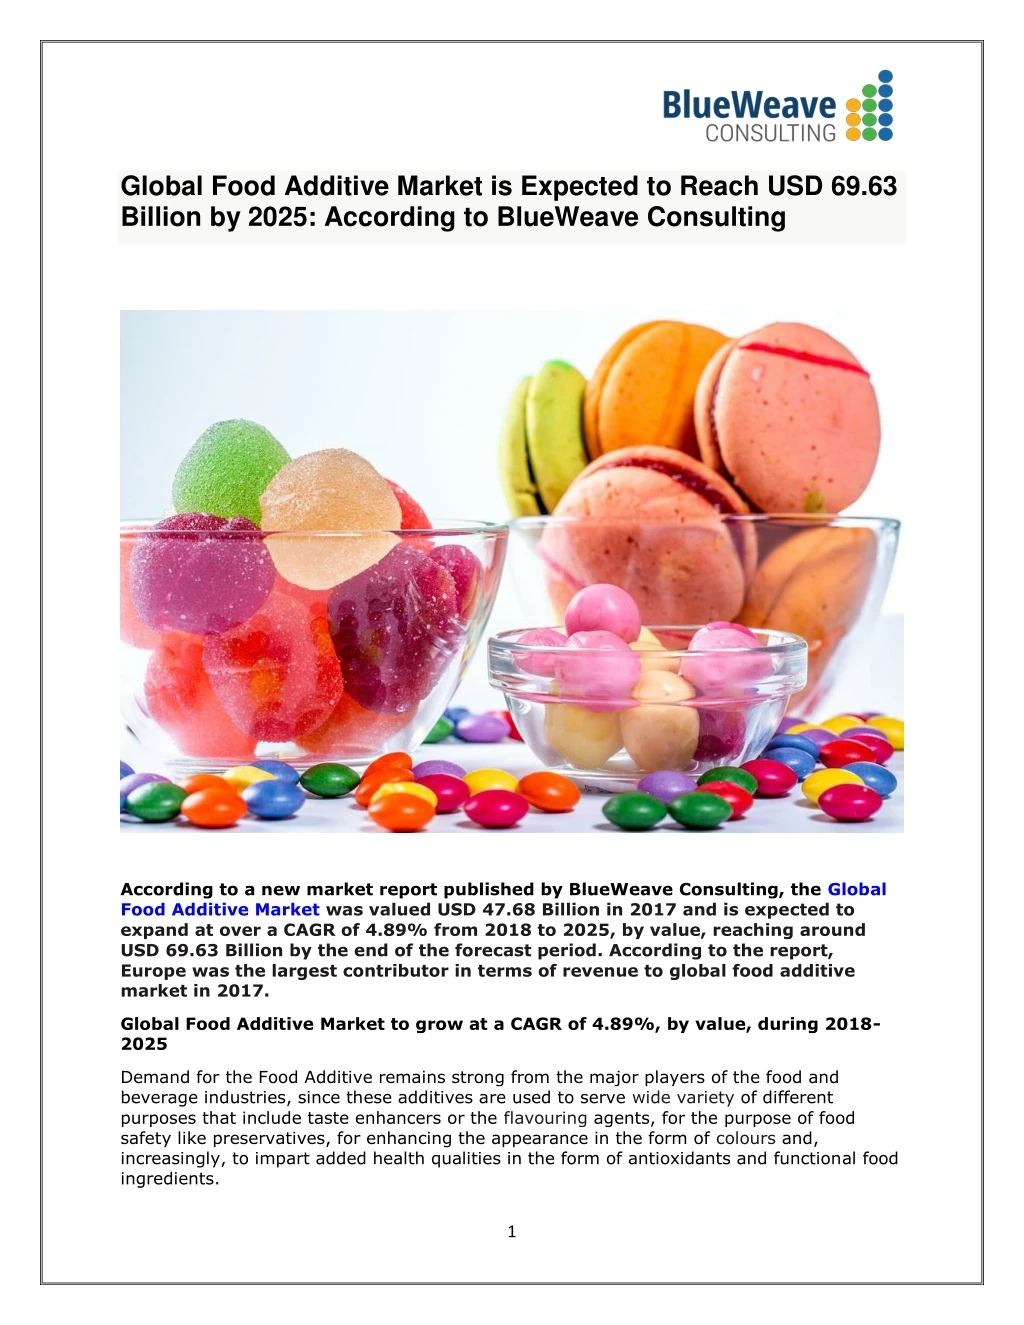 global food additive market is expected to reach